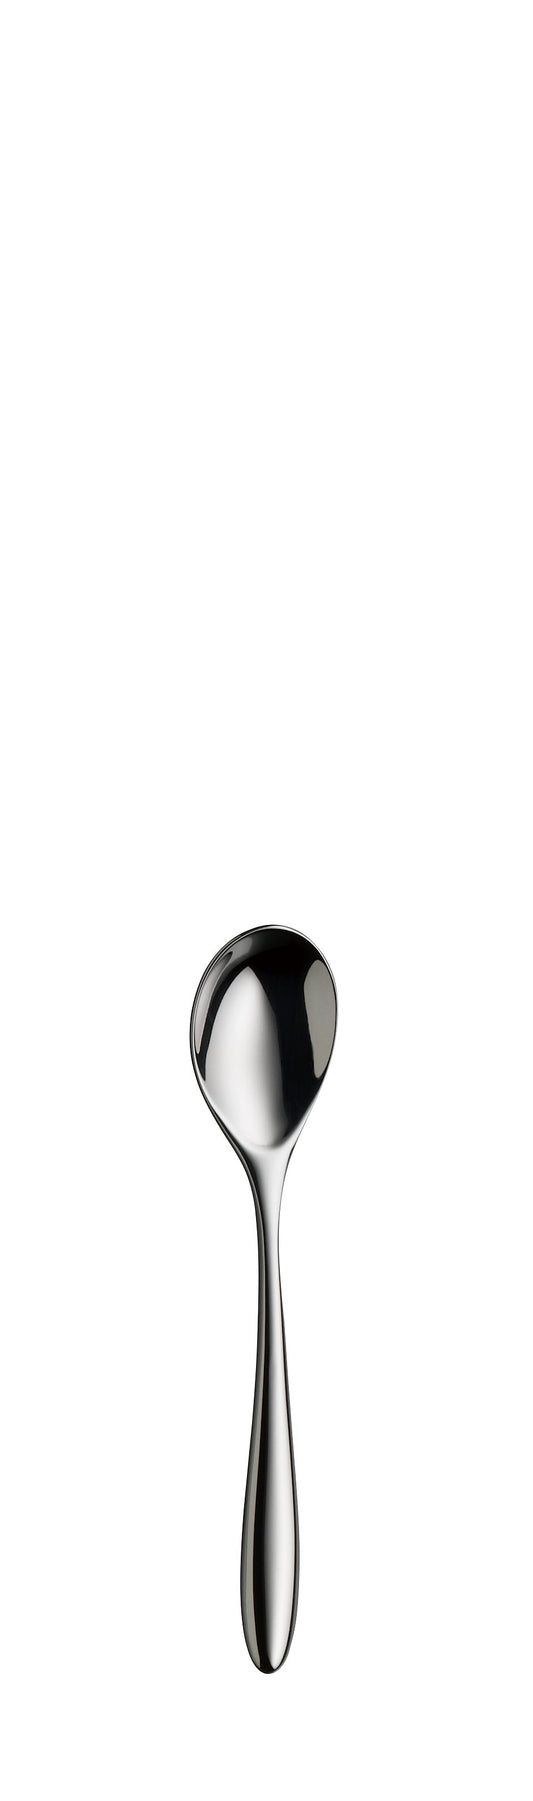 Espresso spoon AVES silverplated 109mm